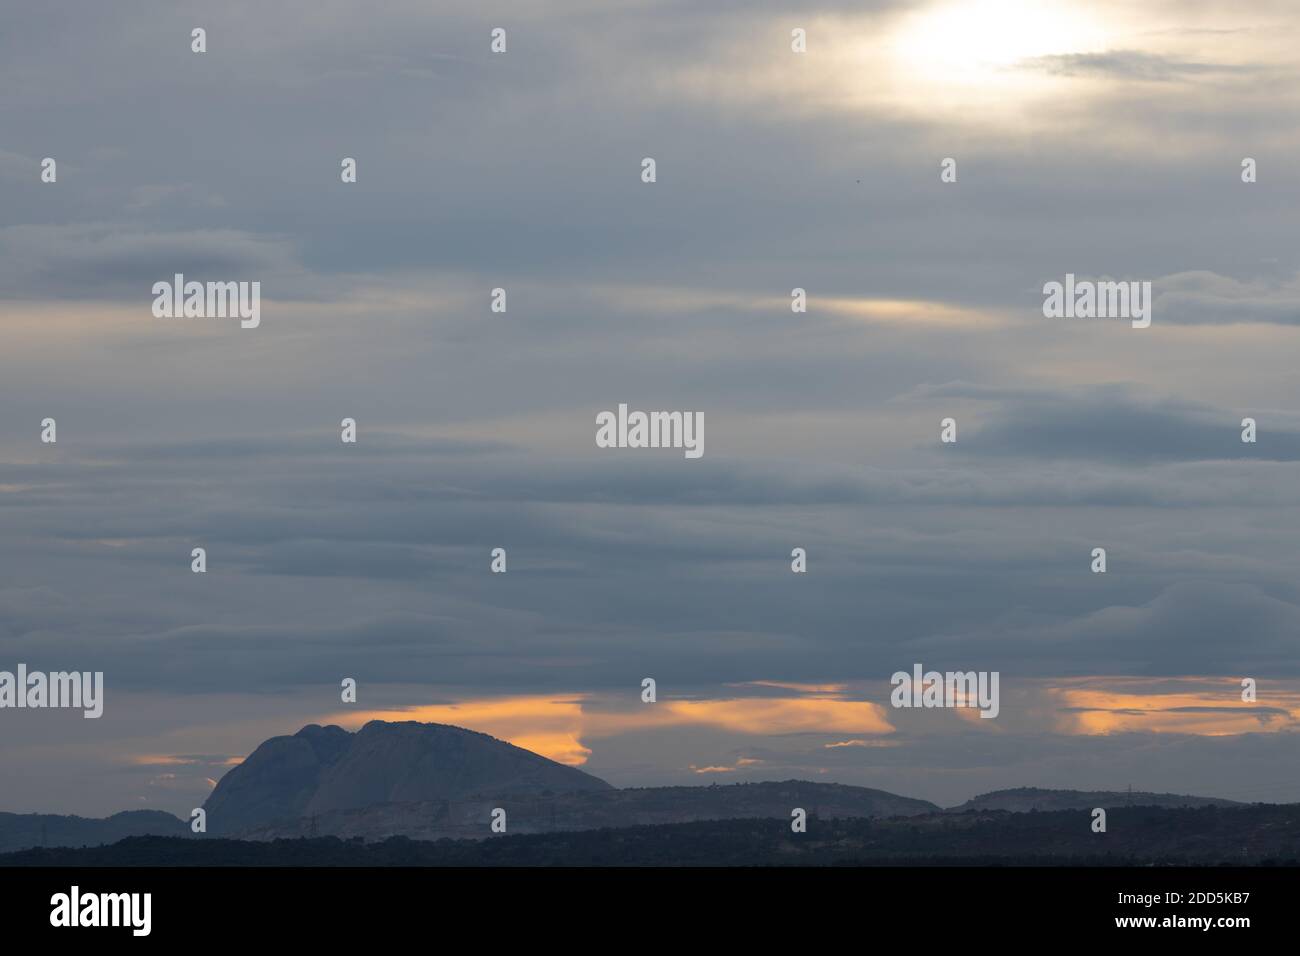 A Panoramic Silhouette of hills in the bottom with dark clouds in the horizon with orange sunlight  peeping through them Stock Photo